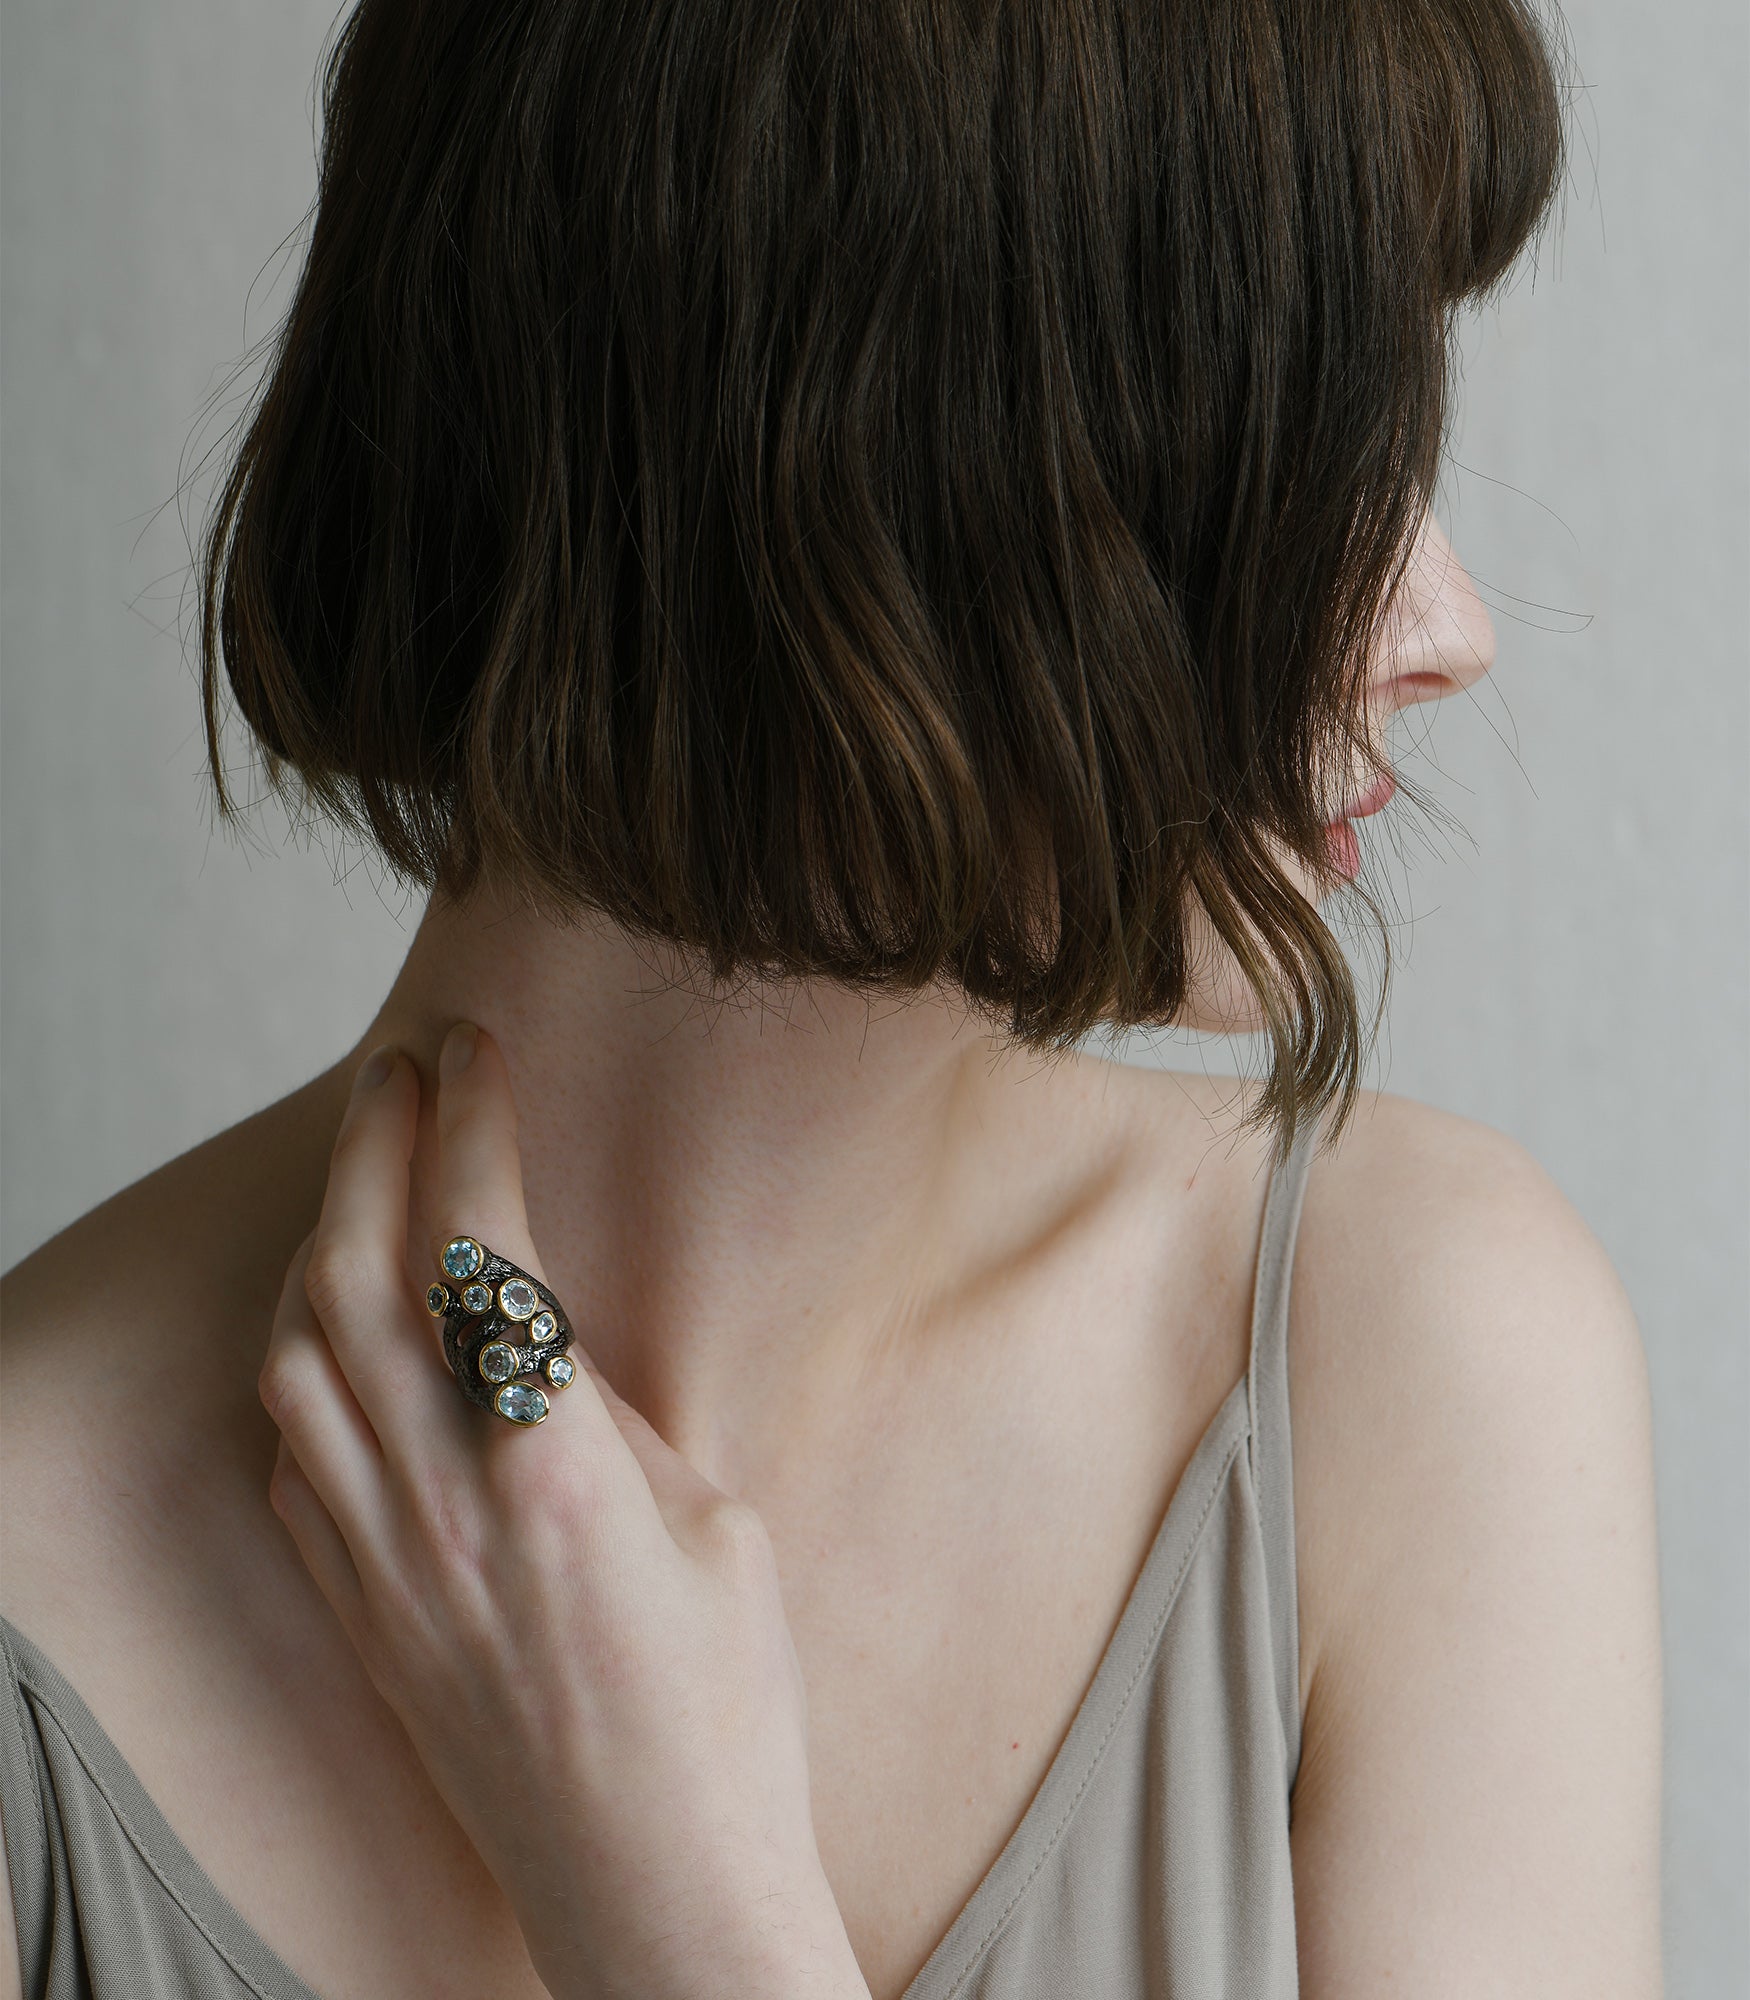 A model wearing an oxidised sterling silver eyelet ring. The ring has an irregular shape with 8 blue topaz stones.